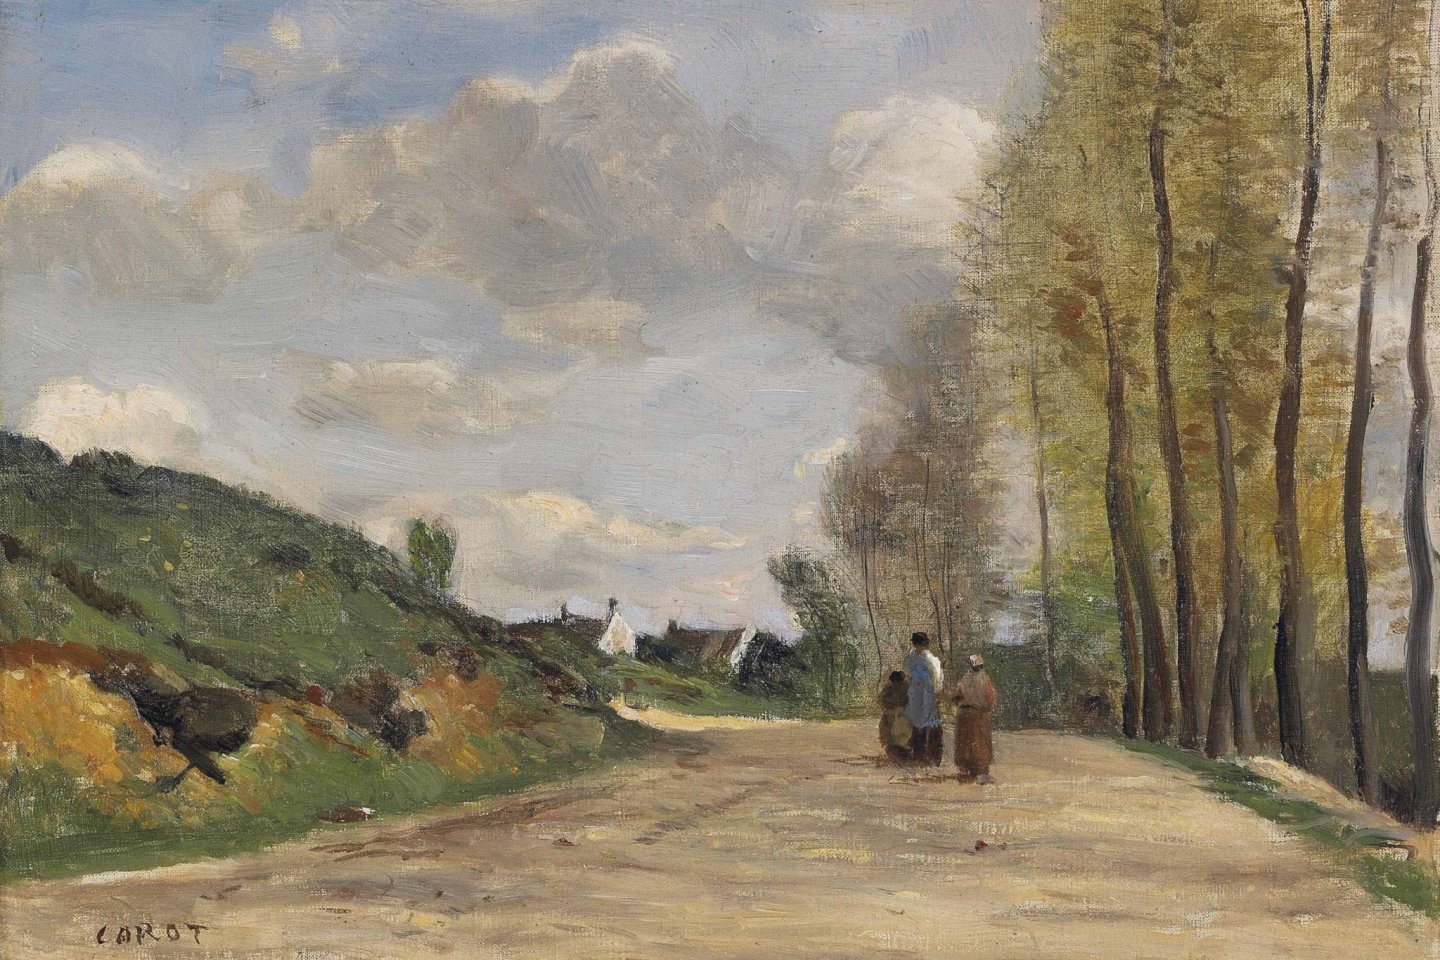 Works by Corot and others will be on display at the event